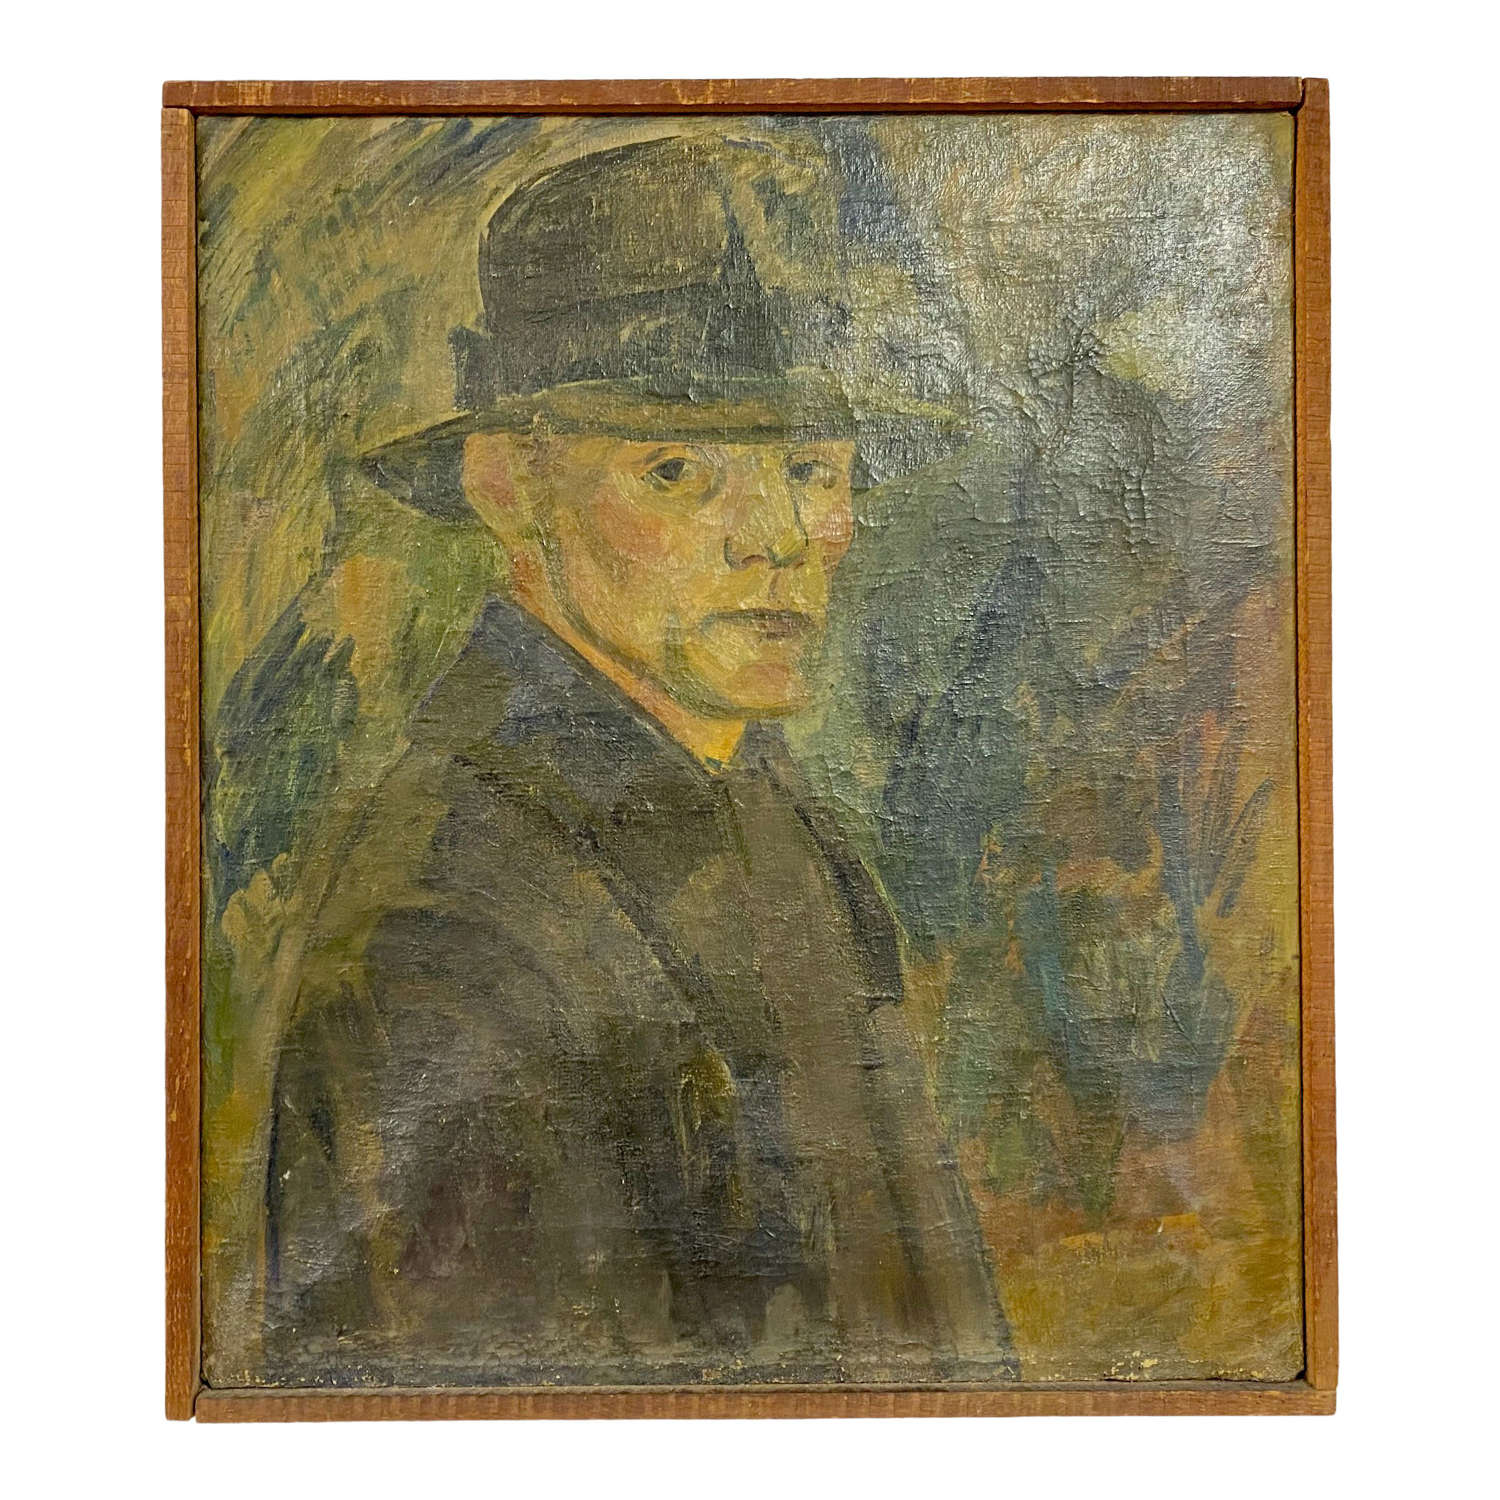 1920s Oil Portrait Painting on Canvas of a Man